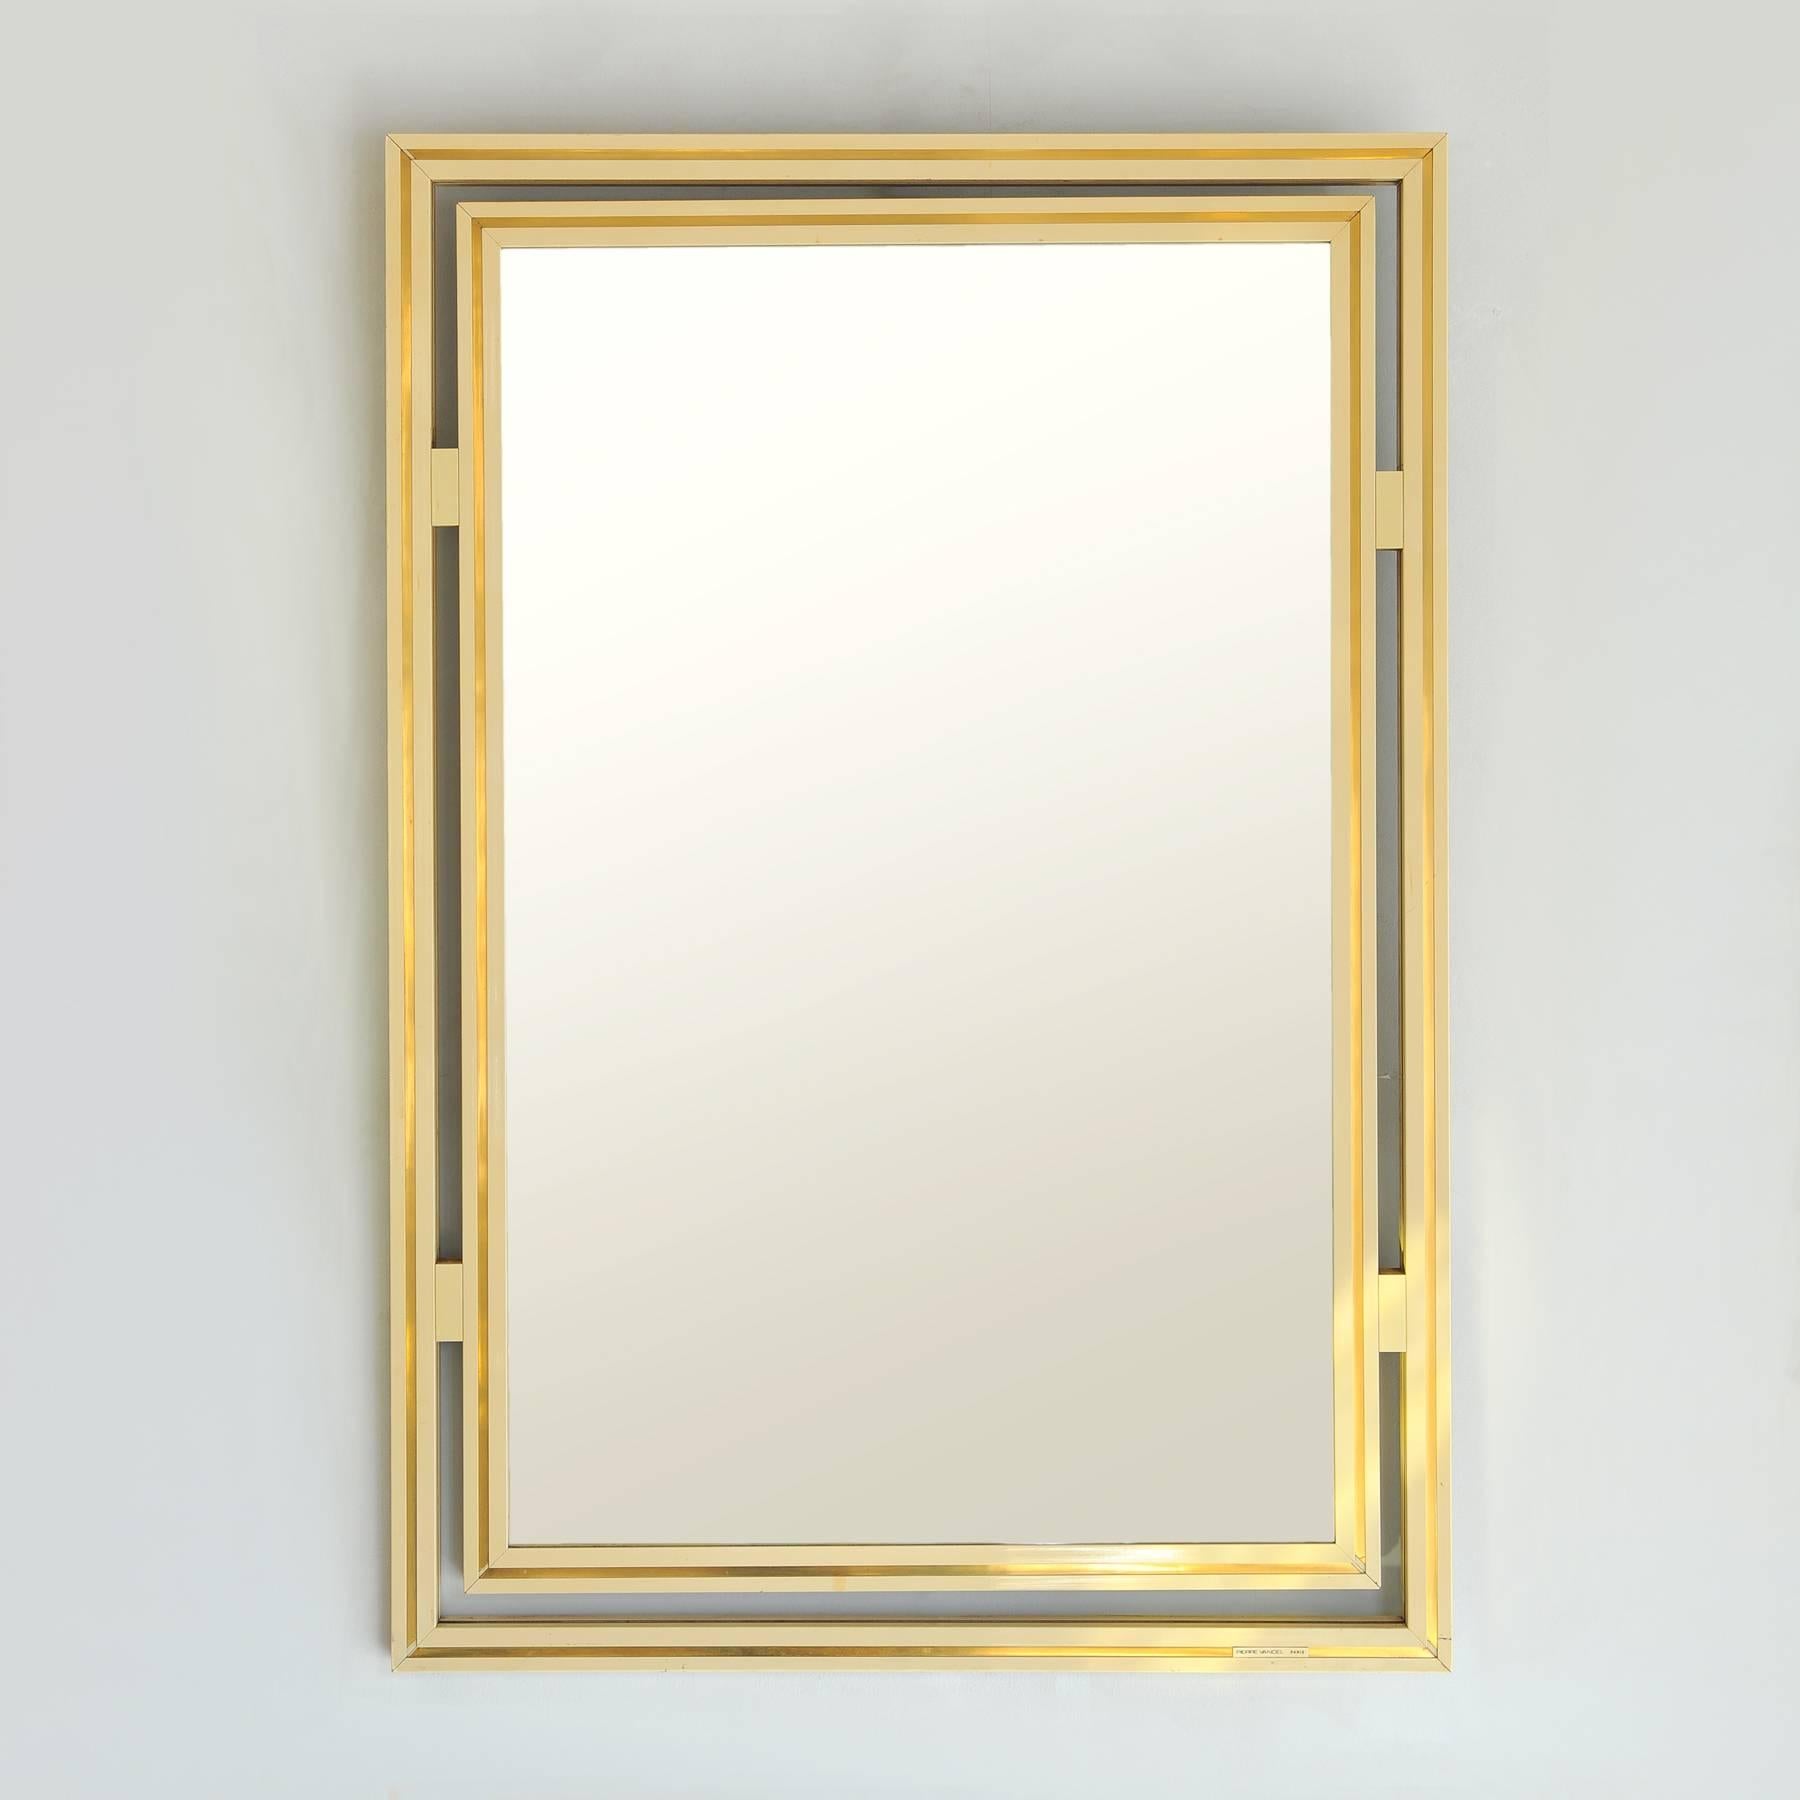 Stylish rectangular mirror with double striped frame in cream and 'gold', signed: 'Pierre Vandel, Paris'.